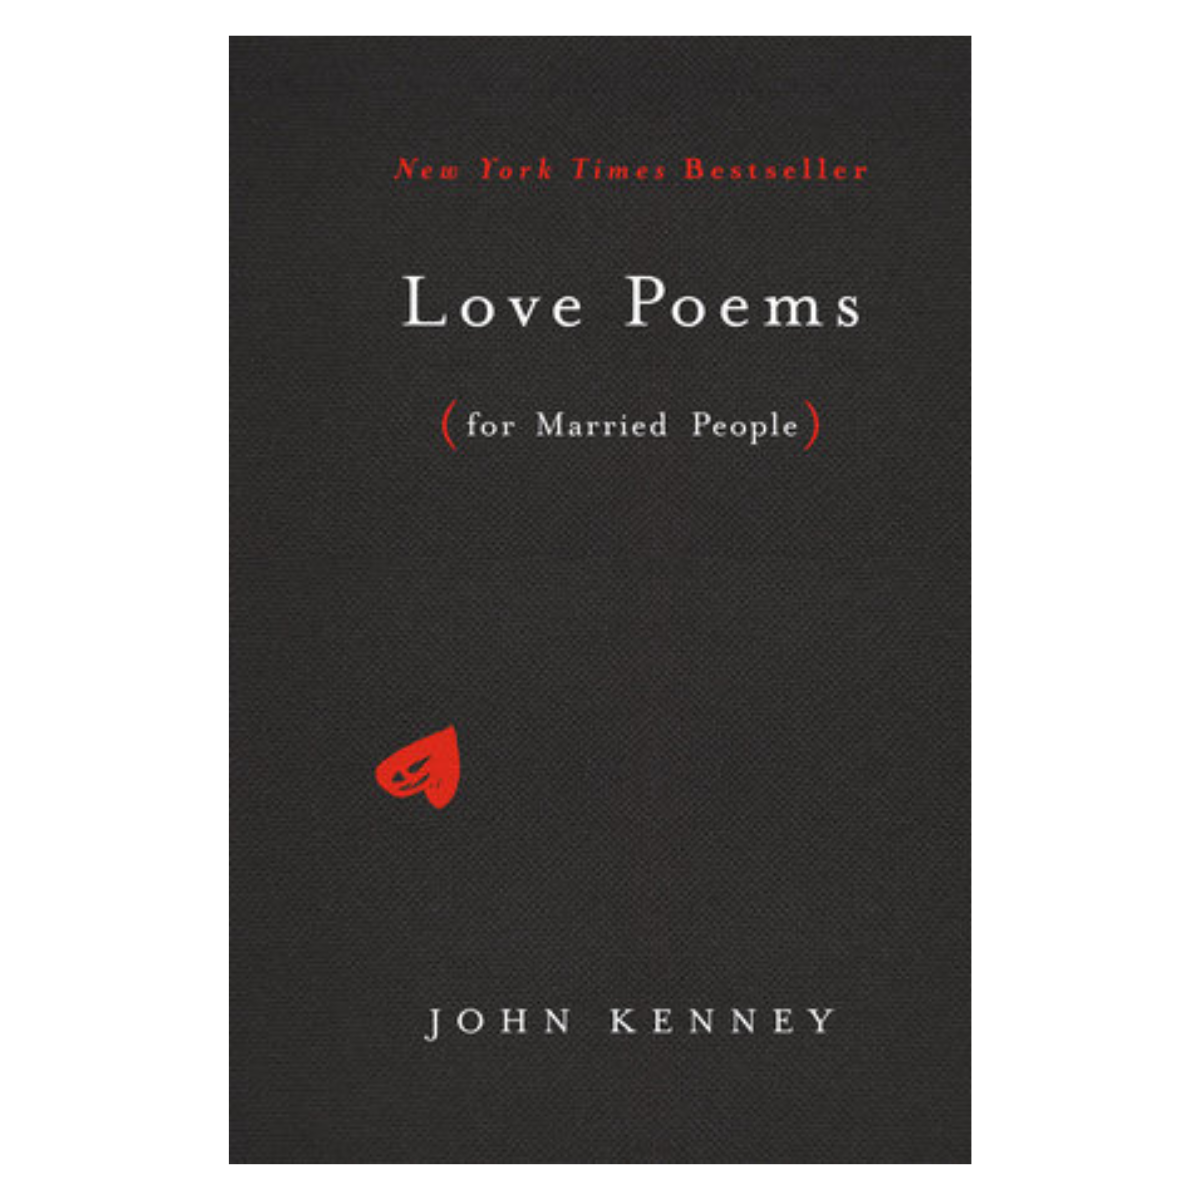 25. Enchant Your Love Story with a Romantic Poetry Book